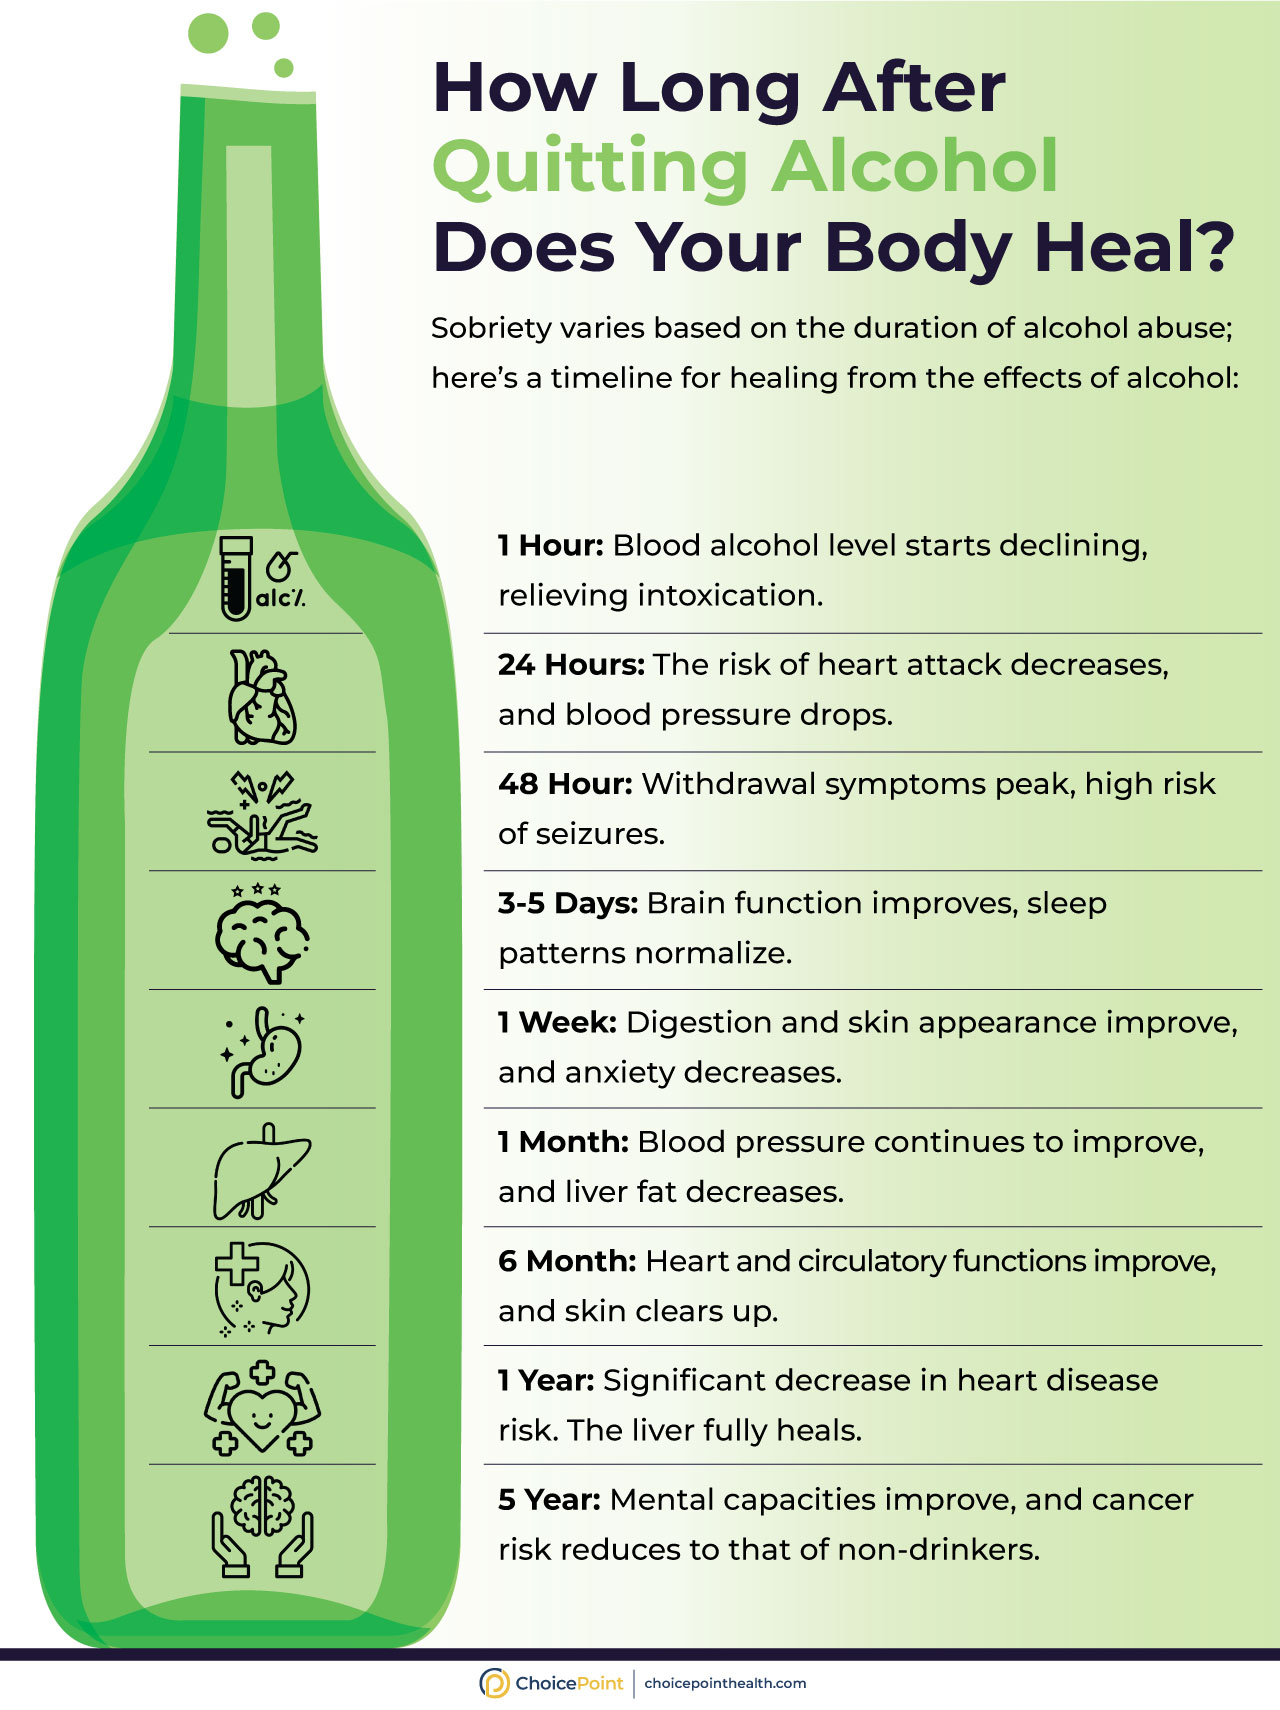 How Does Your Body Heal After Quitting Drinking?